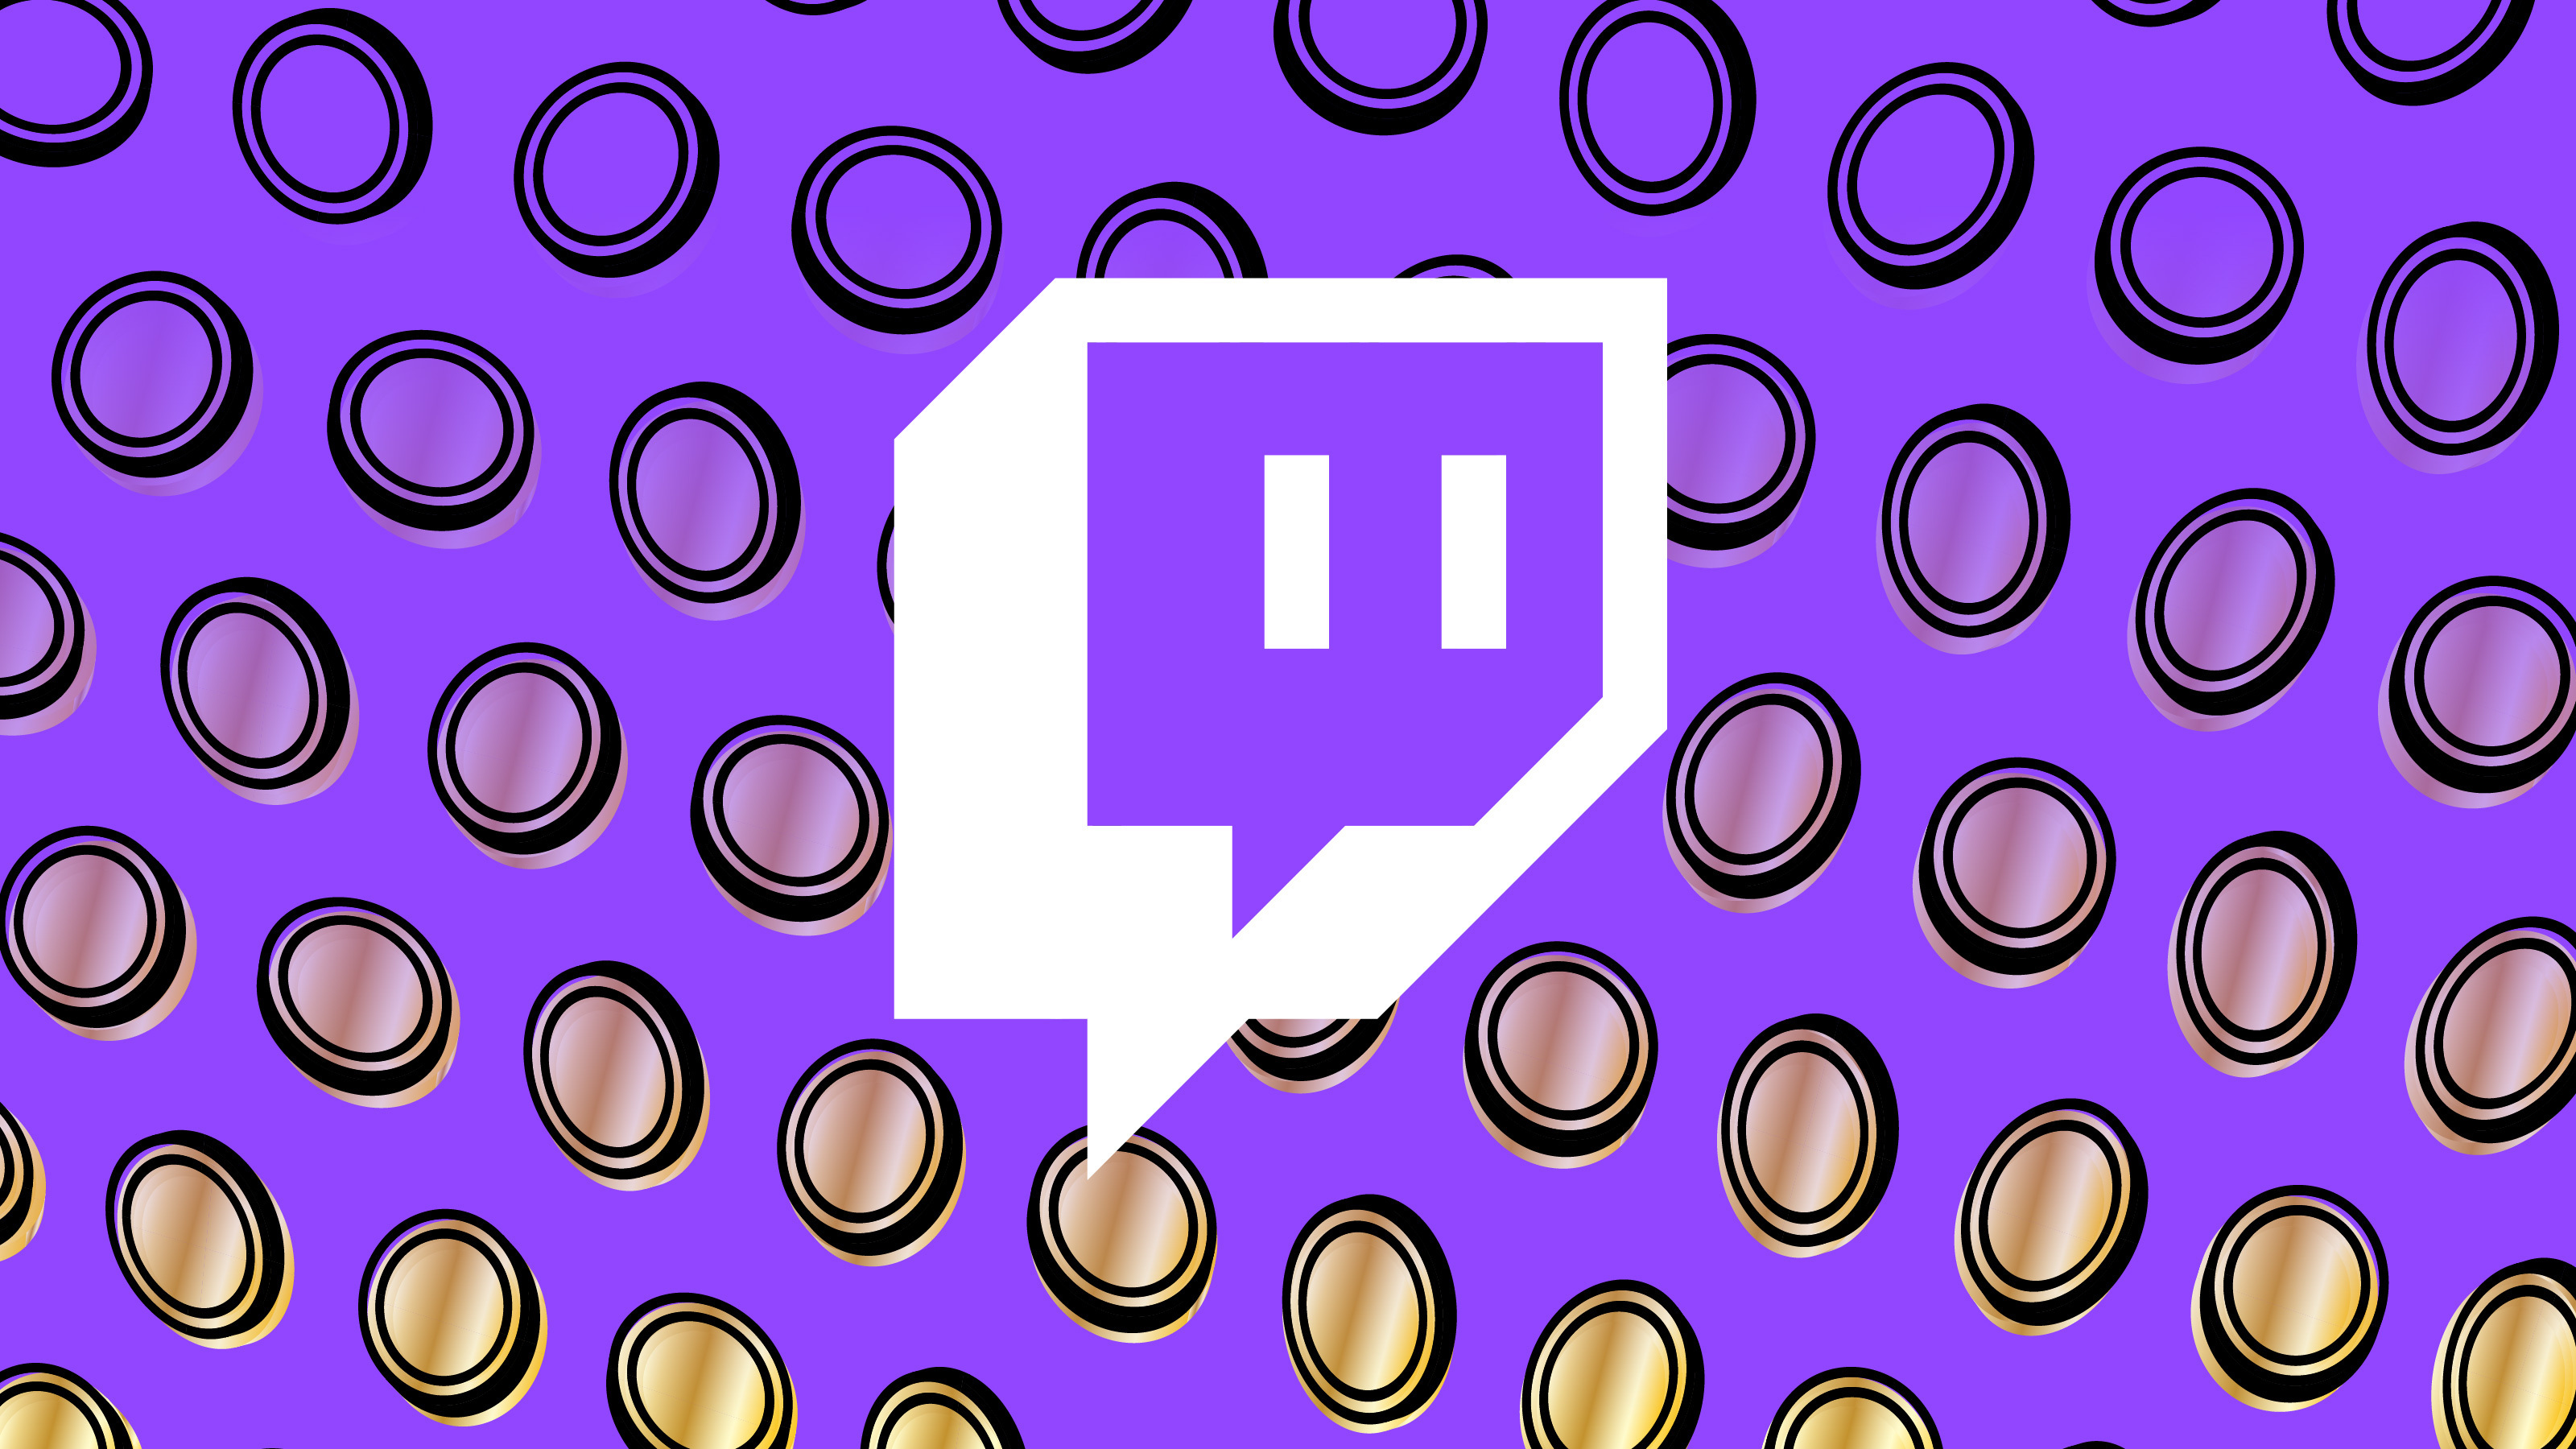 Top 20 Twitch Streamers for 2023 – Followers, Subscribers, and